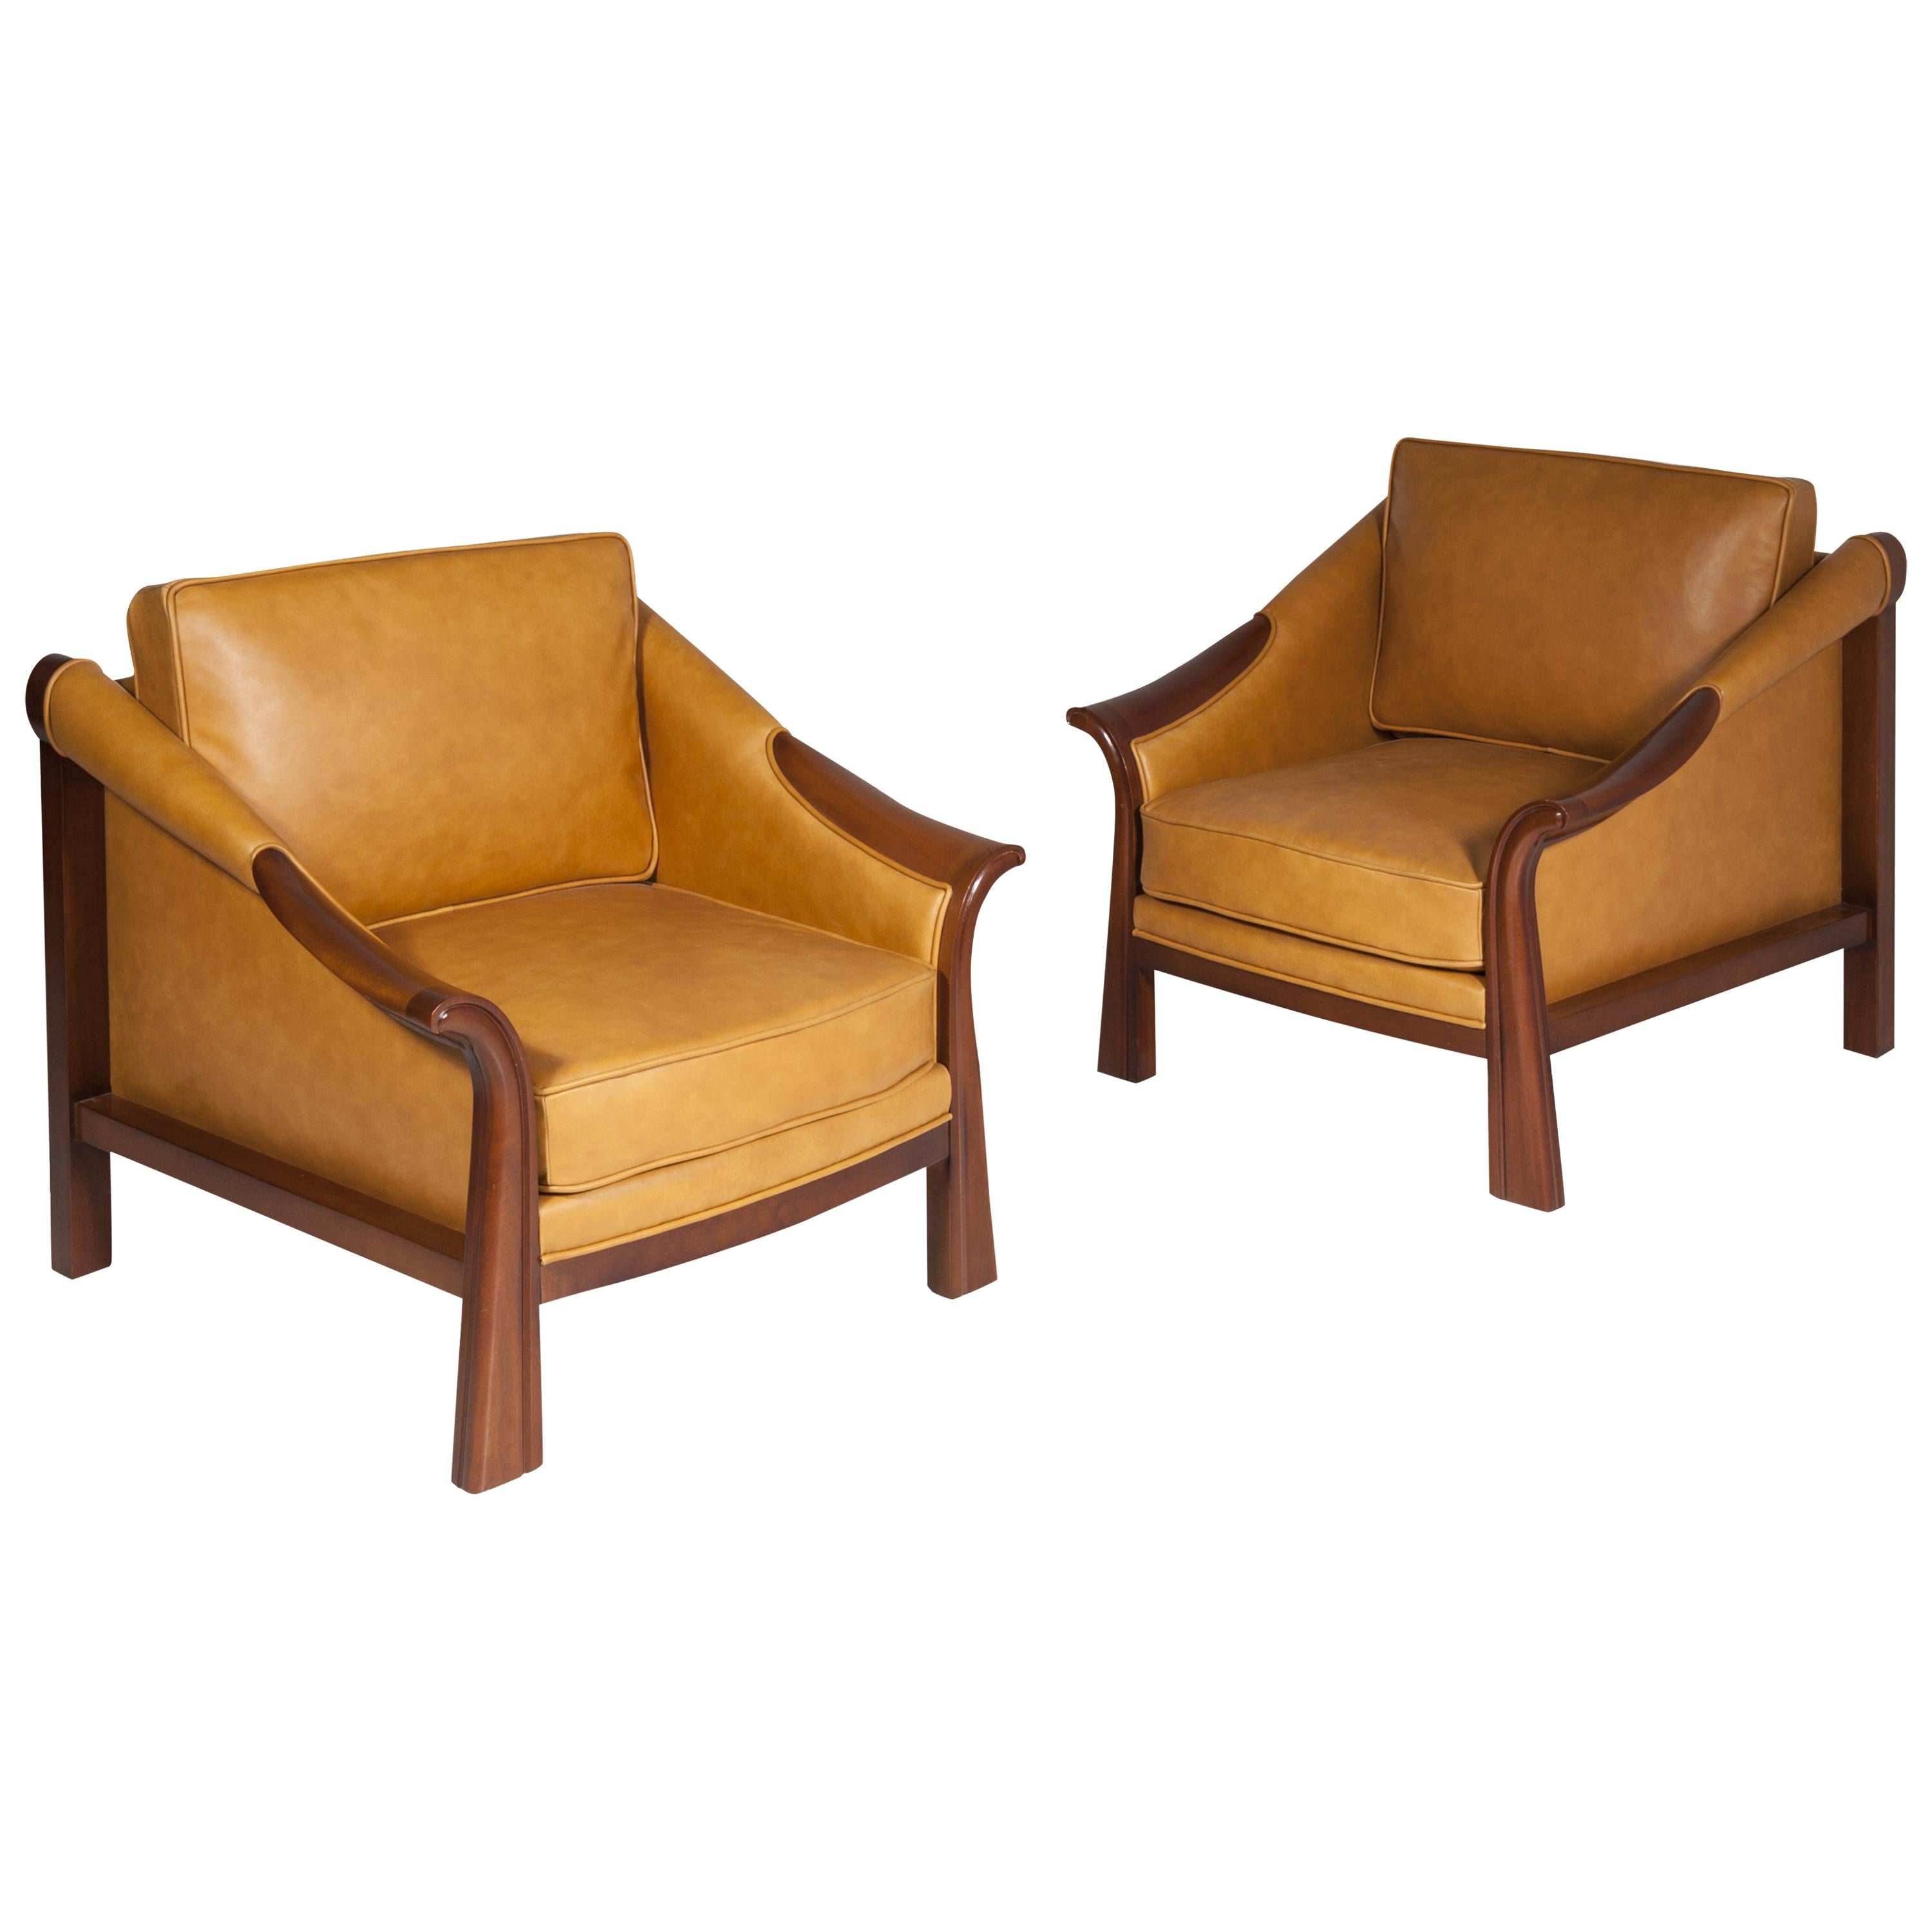 Pair of Armchair by Pierre Chareau